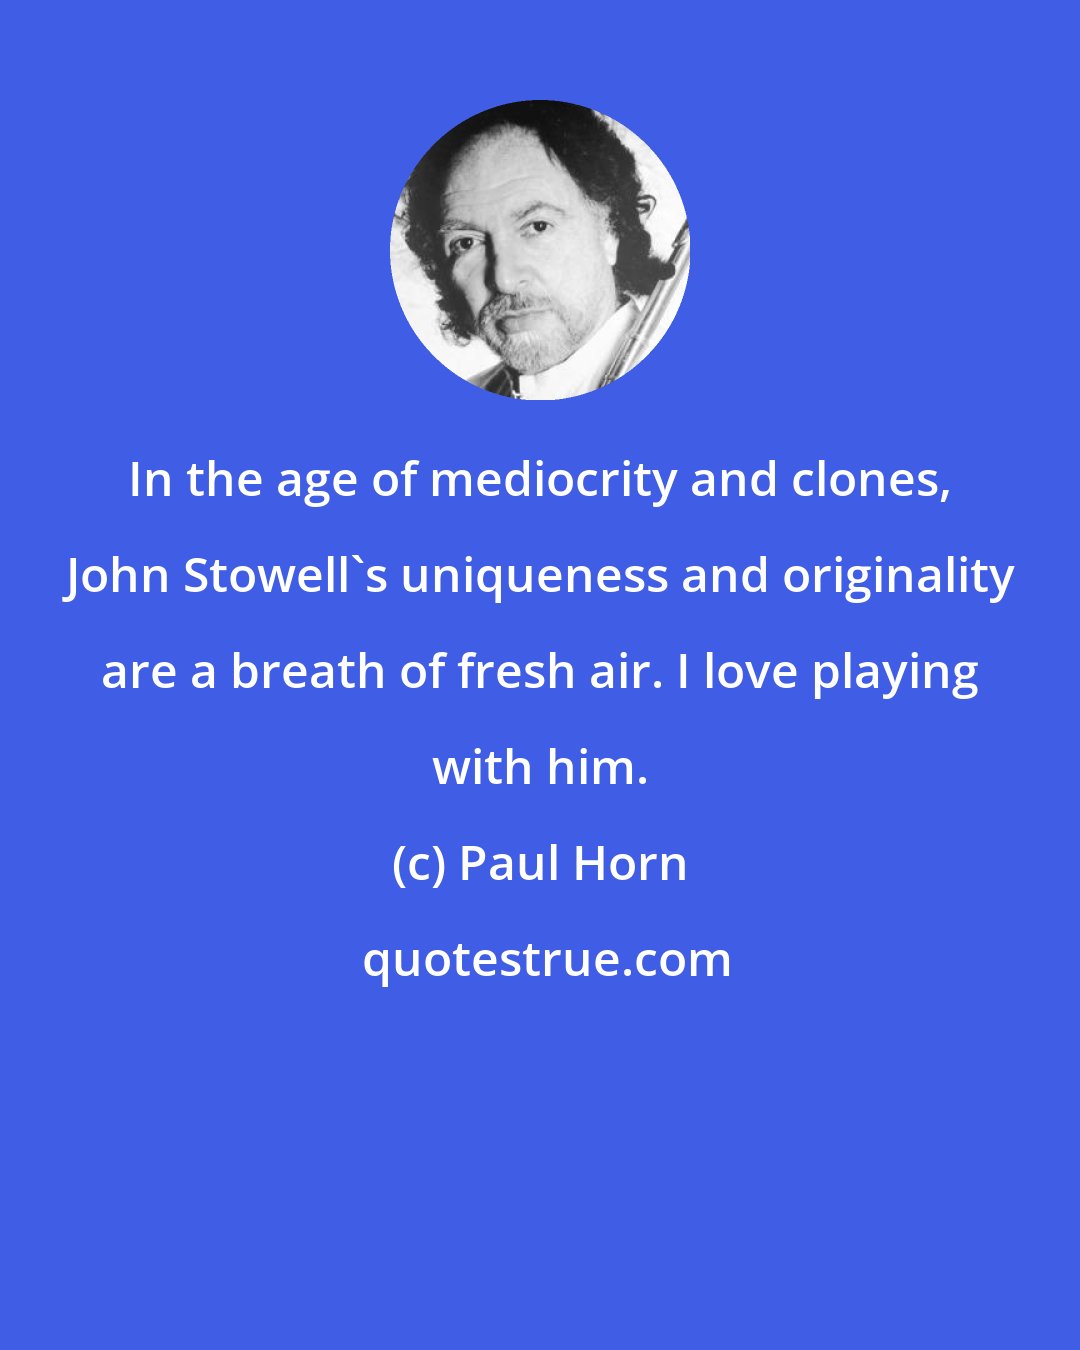 Paul Horn: In the age of mediocrity and clones, John Stowell's uniqueness and originality are a breath of fresh air. I love playing with him.